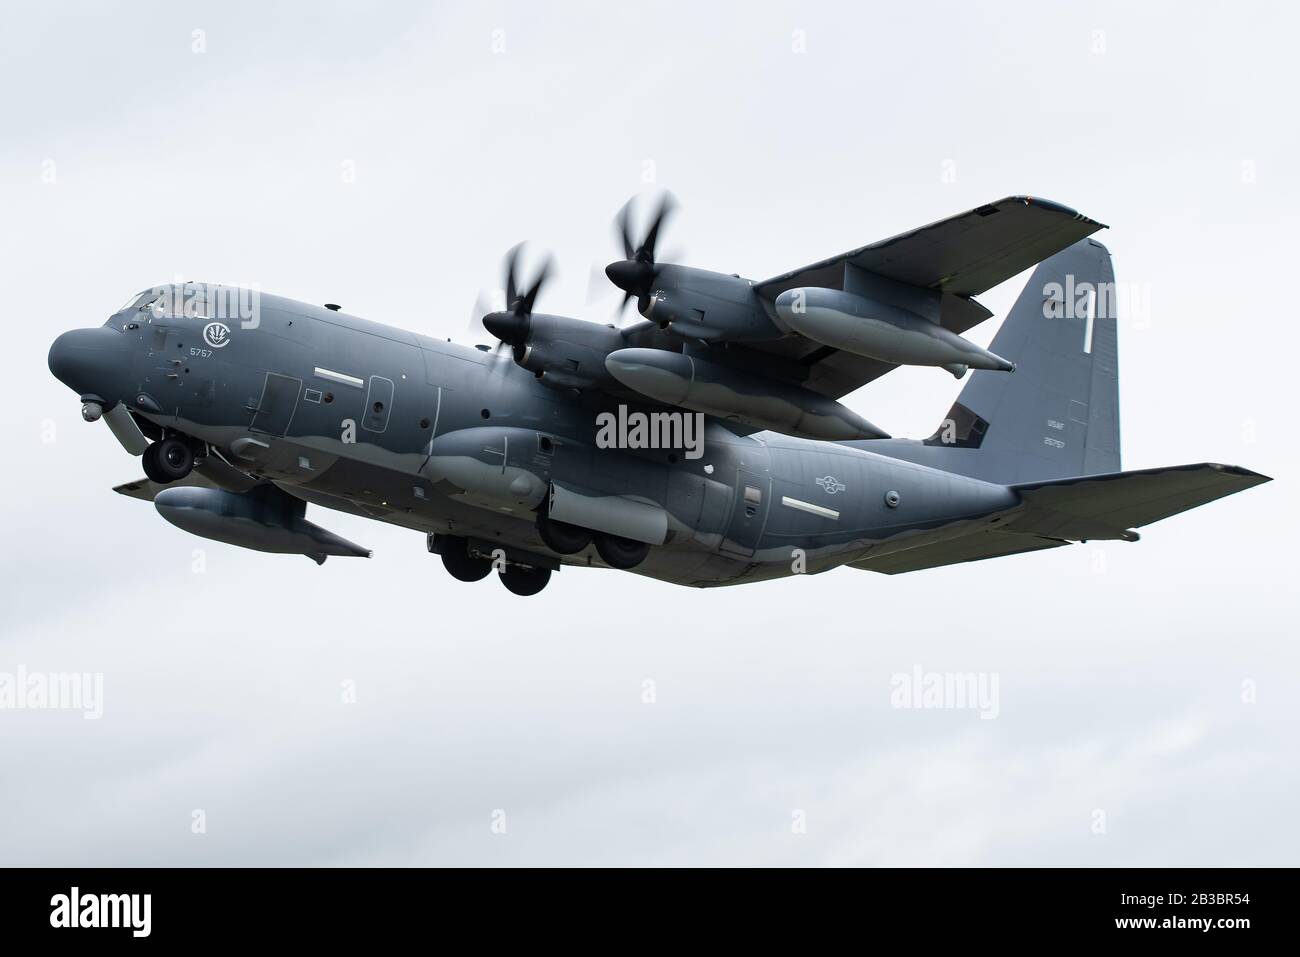 A Lockheed Martin MC-130J Commando II special mission aircraft of the 352nd Special Operations Wing operated by the United States Air Force. Stock Photo